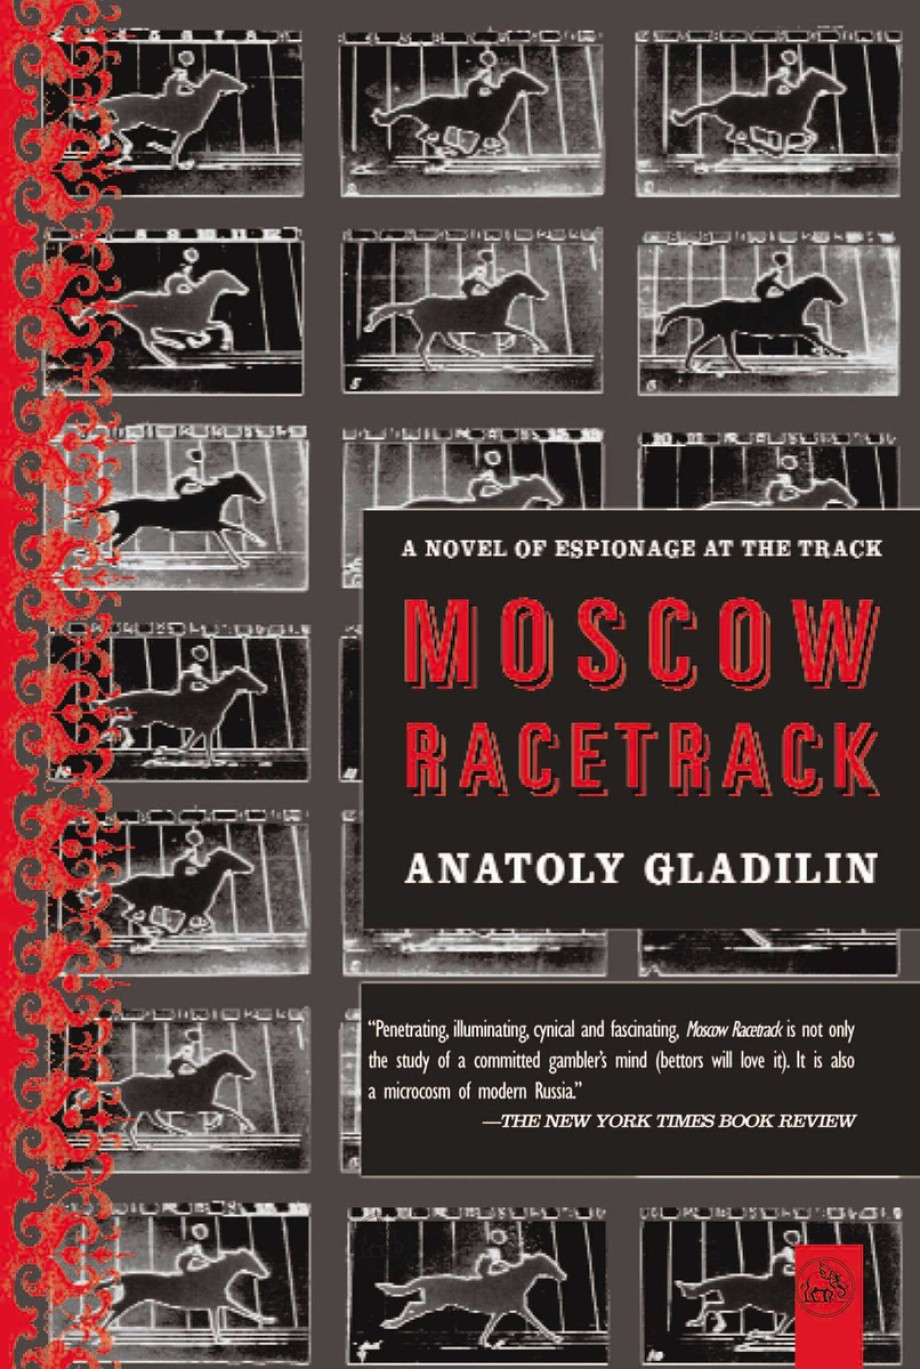 Moscow Racetrack A Novel of Espionage at the Track